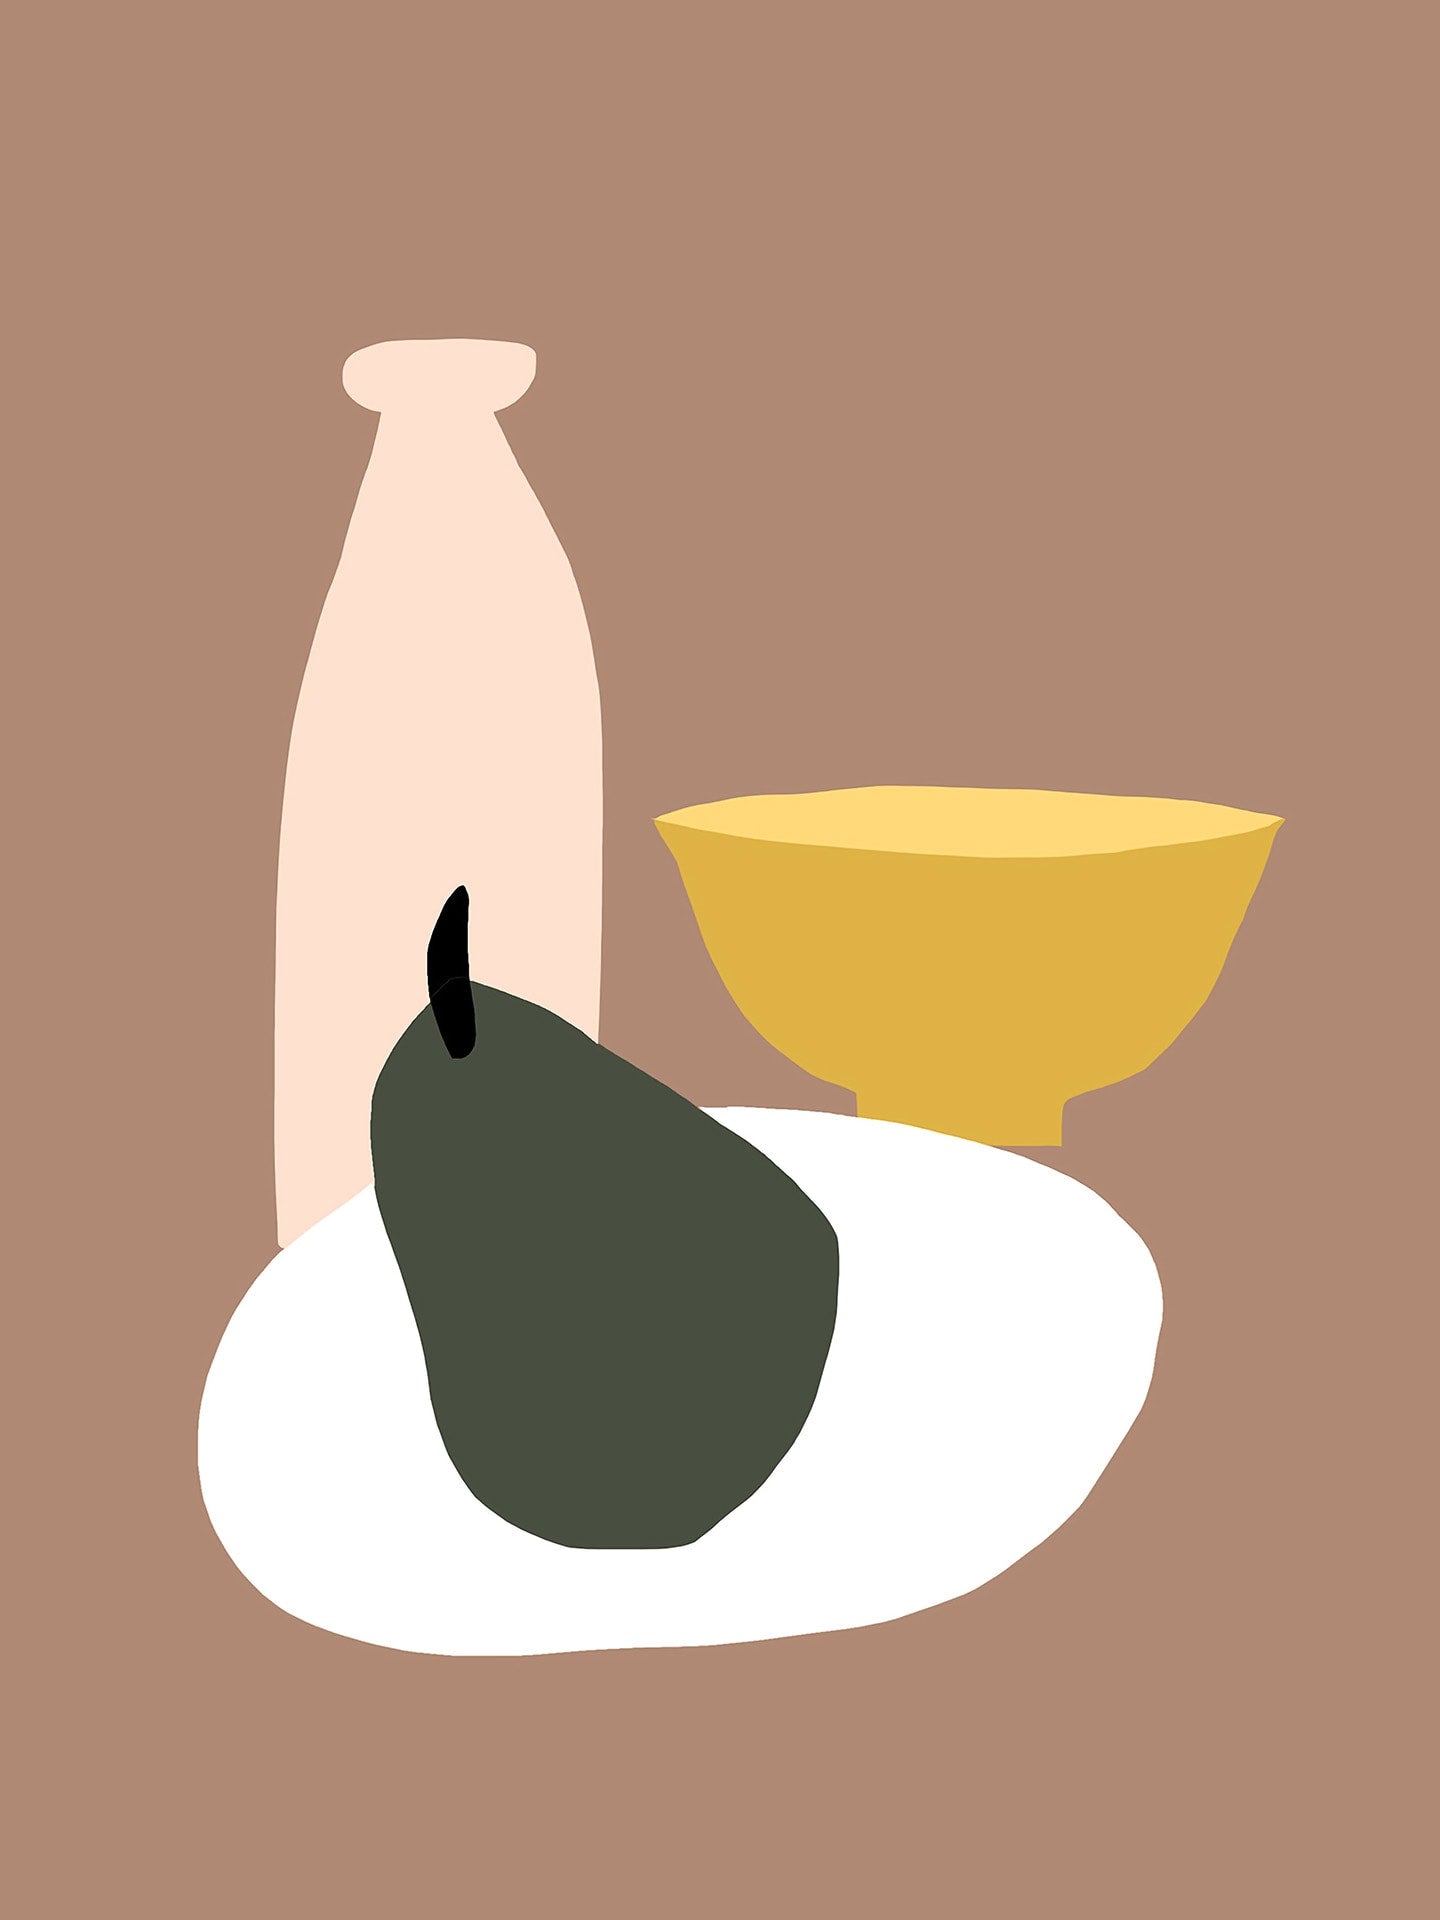 An illustration of a pear, a bowl and a bottle.